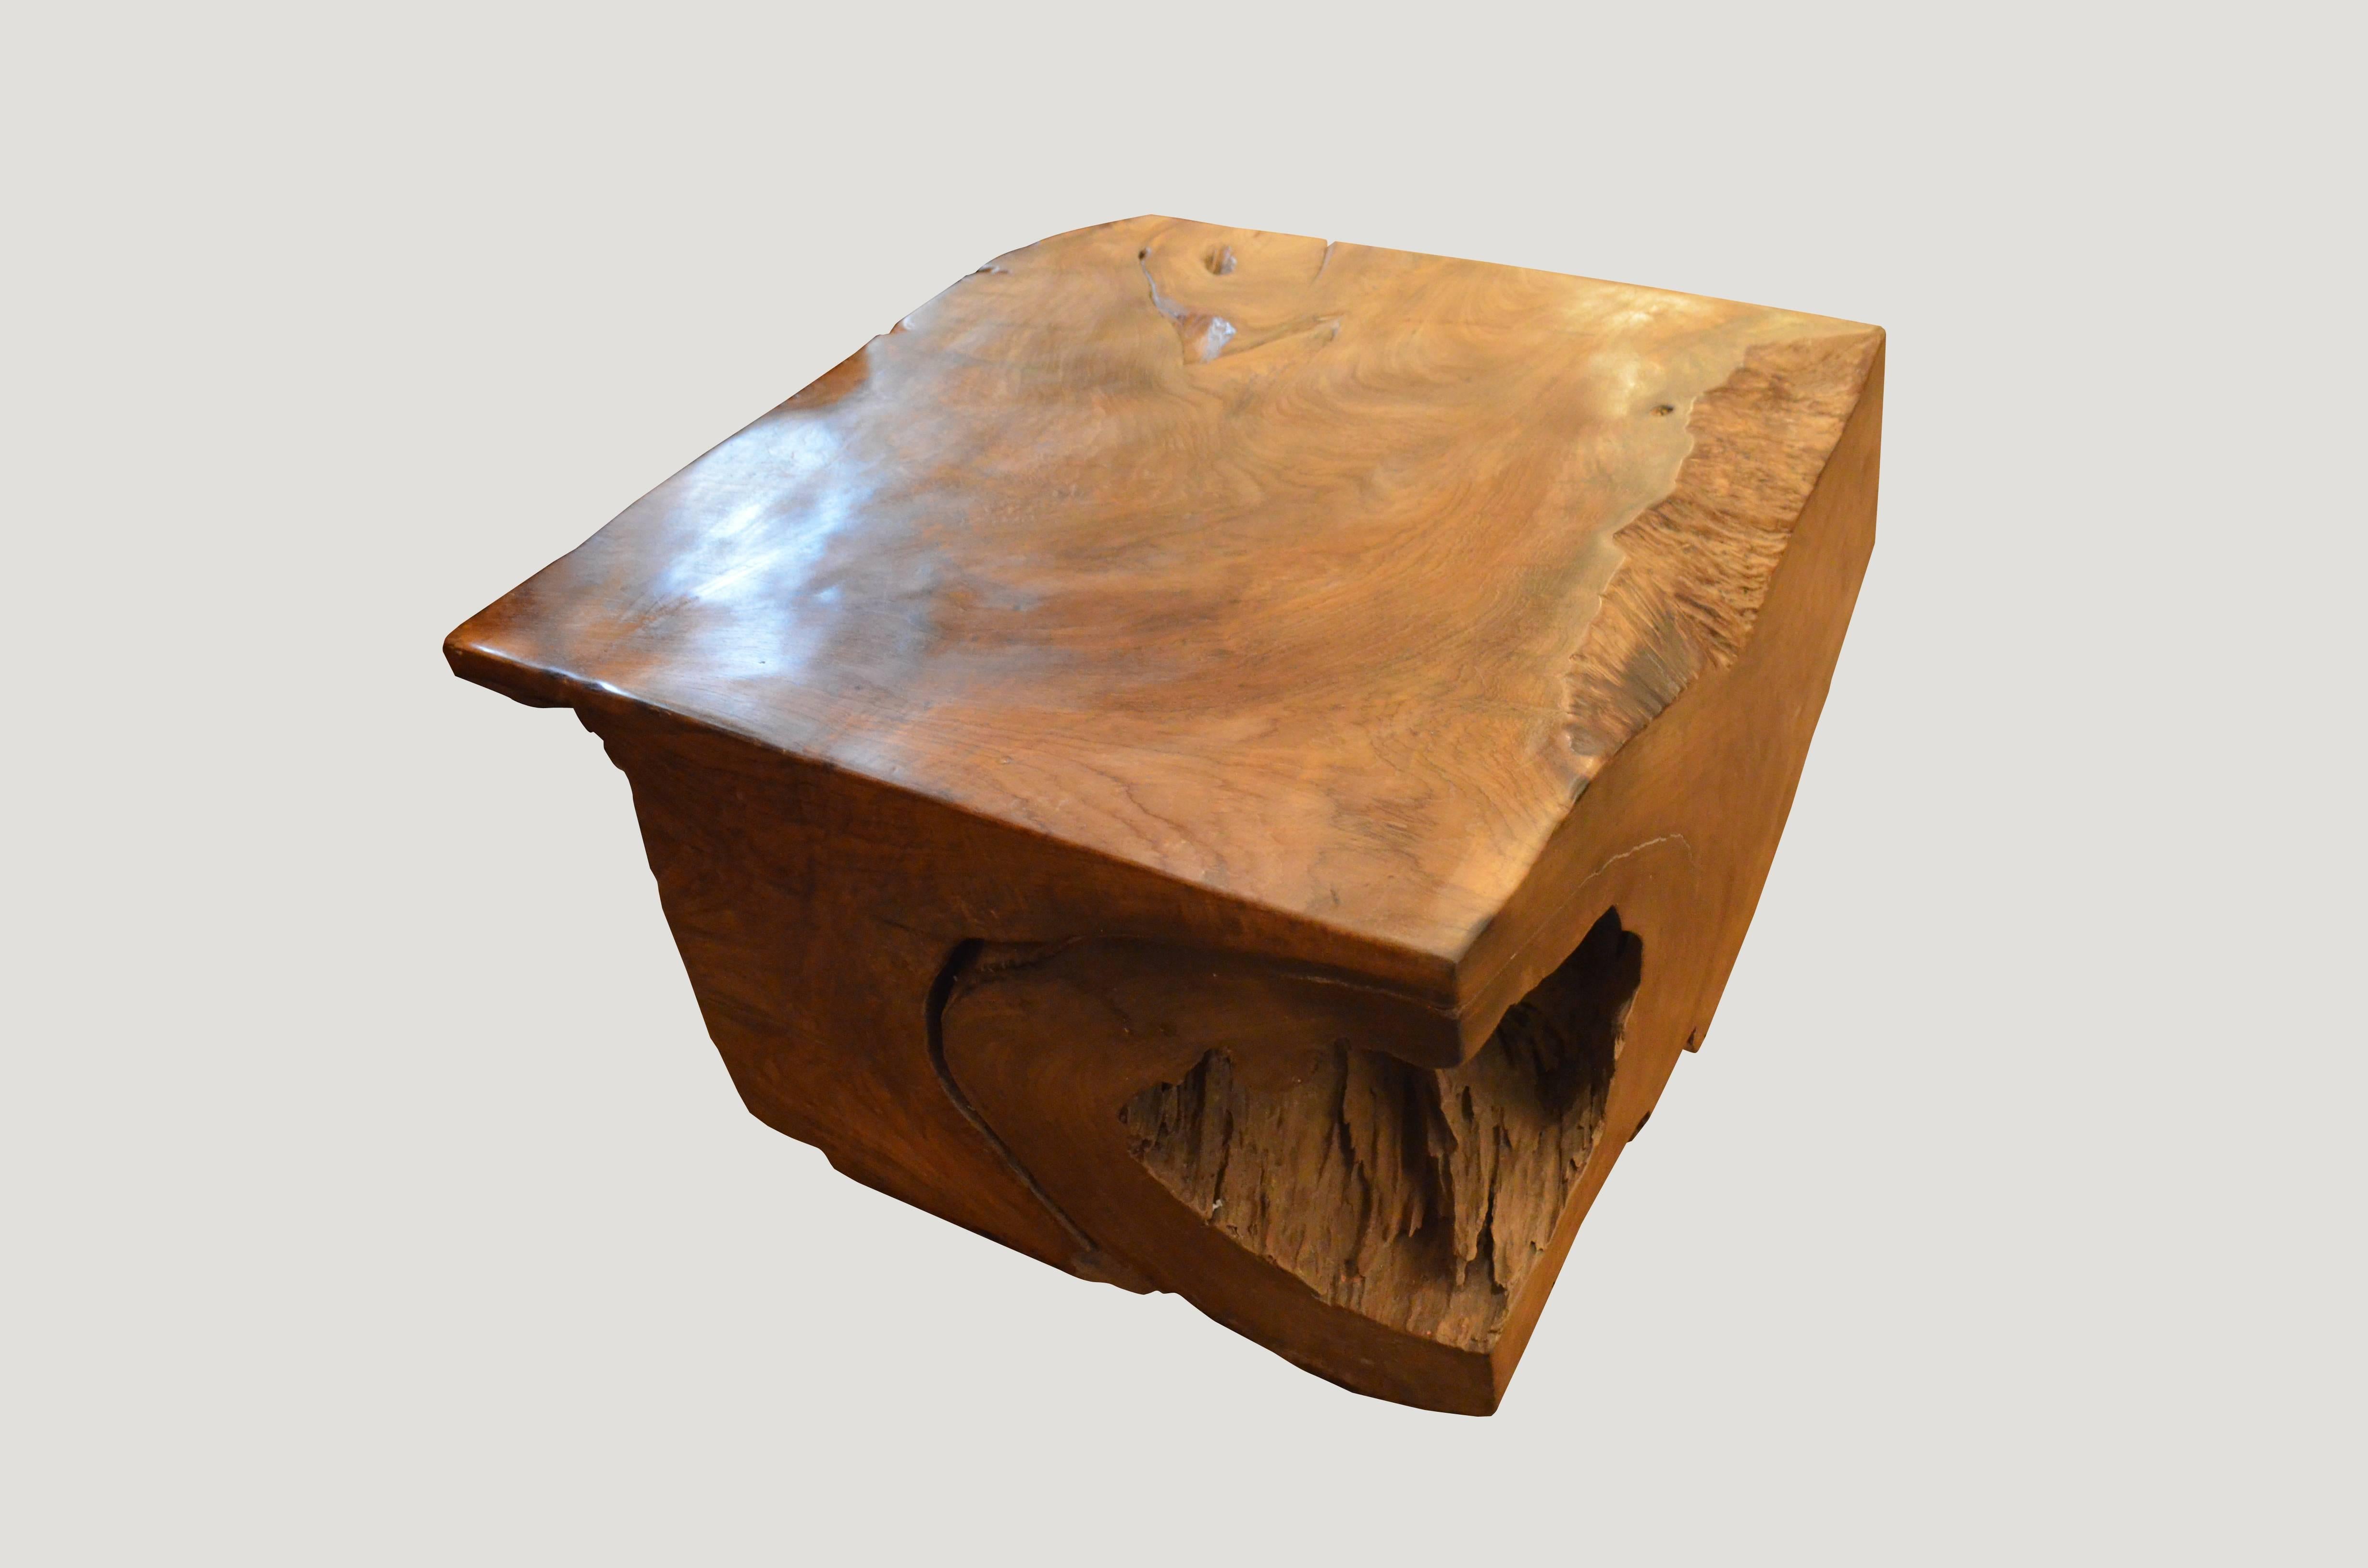 Stunning patina on this single reclaimed teak wooden root coffee table.

This coffee table was sourced in the spirit of wabi-wabi, a Japanese philosophy that beauty can be found in imperfection and impermanence. It’s a beauty of things modest and